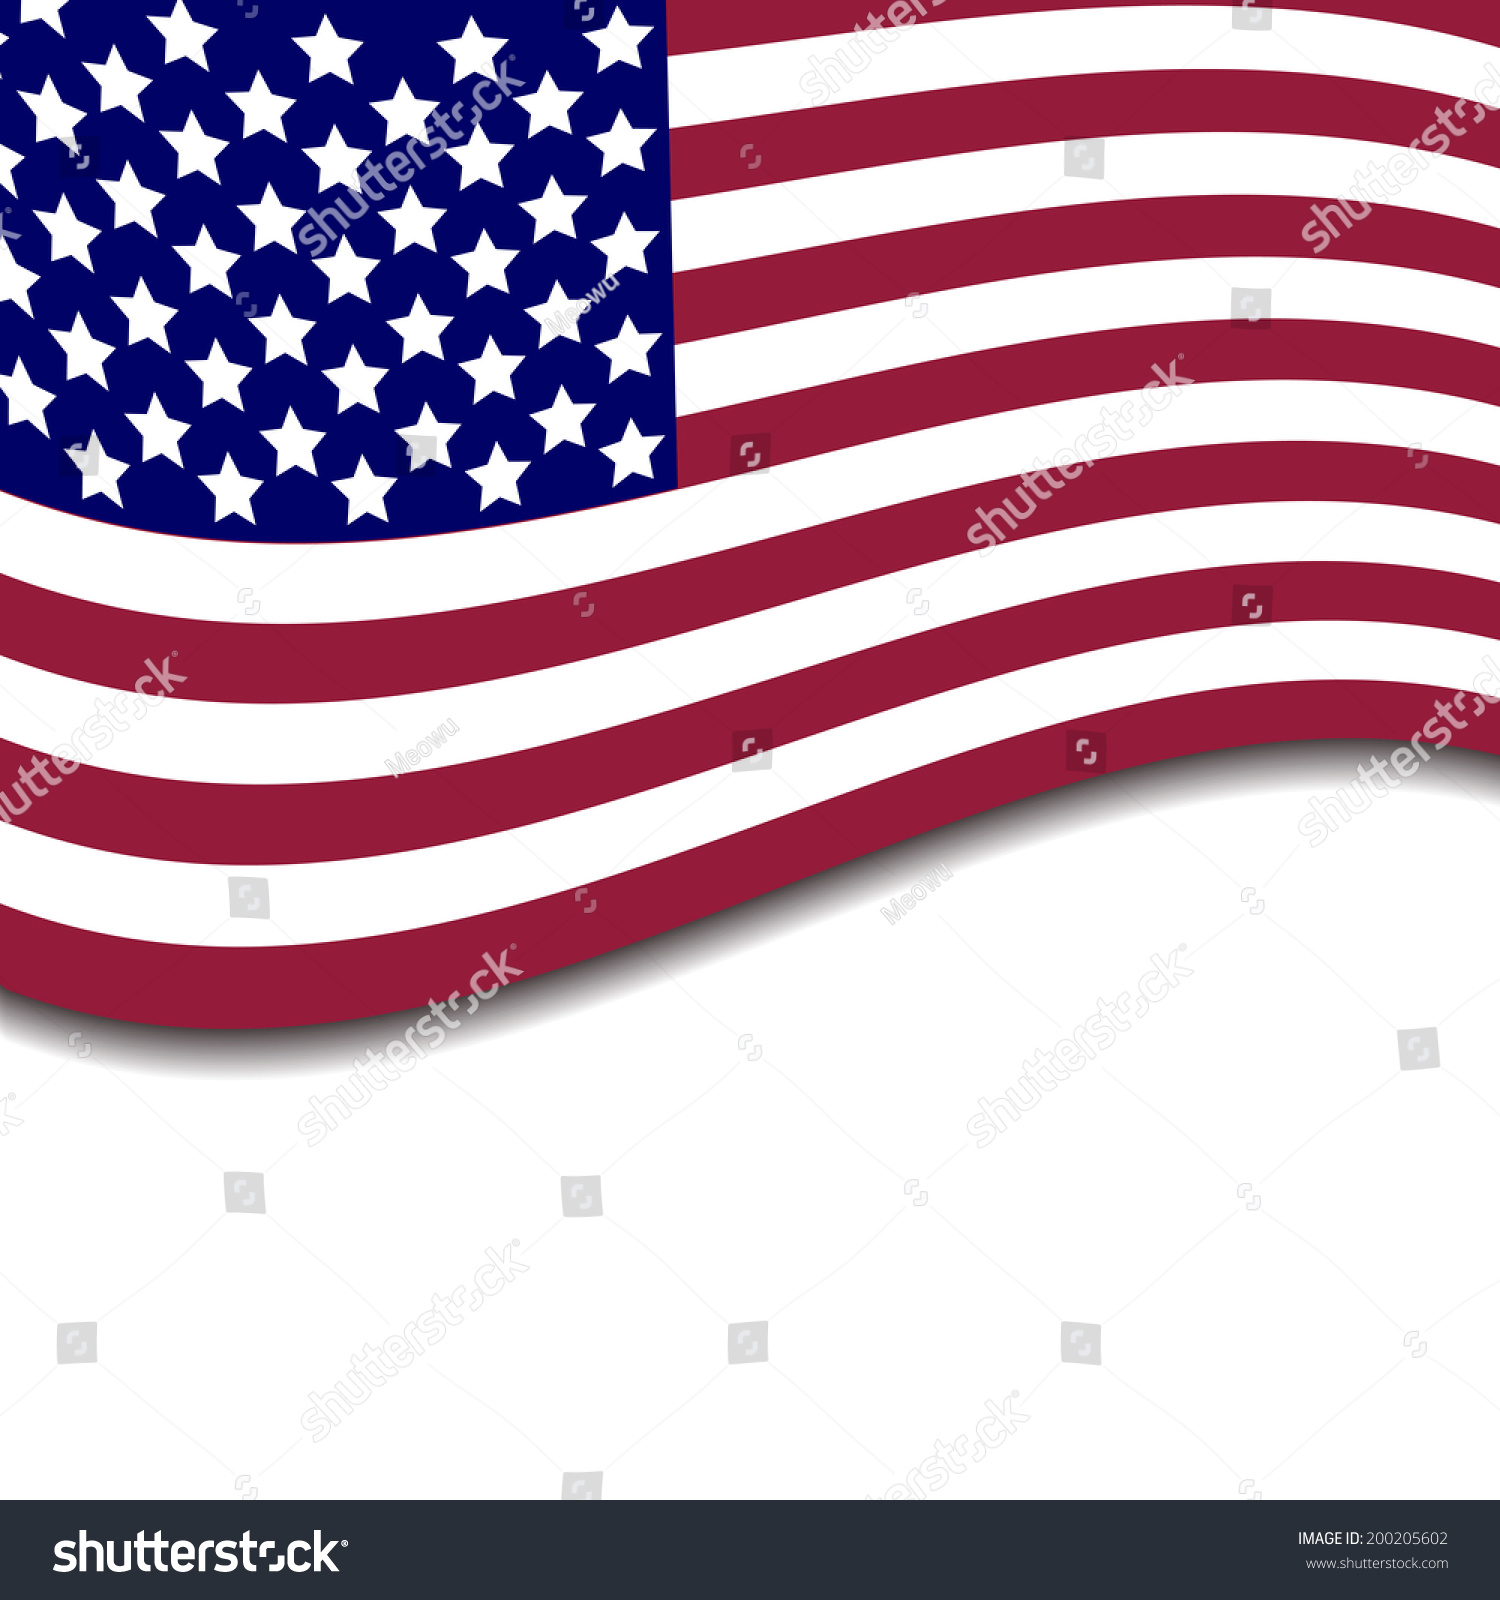 Colorful vector illustration of independence day USA with national flag and spase for text, holiday card by July 4 #200205602